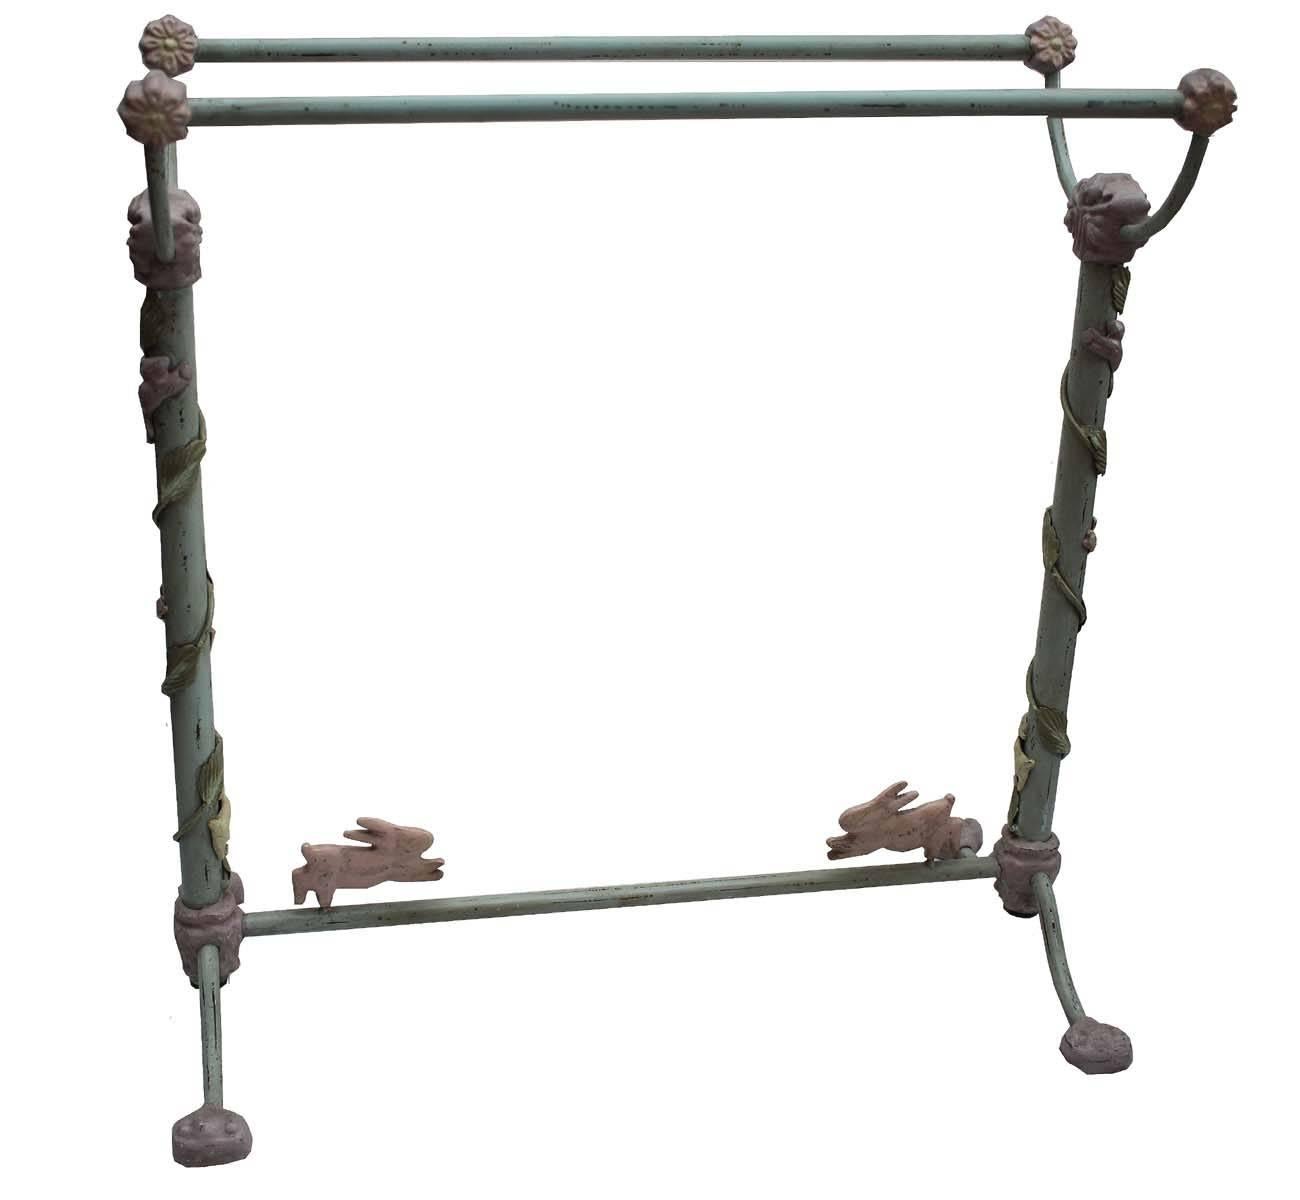 Beautiful, all original metal quilt rack. Amazing color with detailed antique elements, rabbits and flowers. The metal work is quite detailed and like nothing I have sourced in the past. Sturdy and well made this is truly a great find.